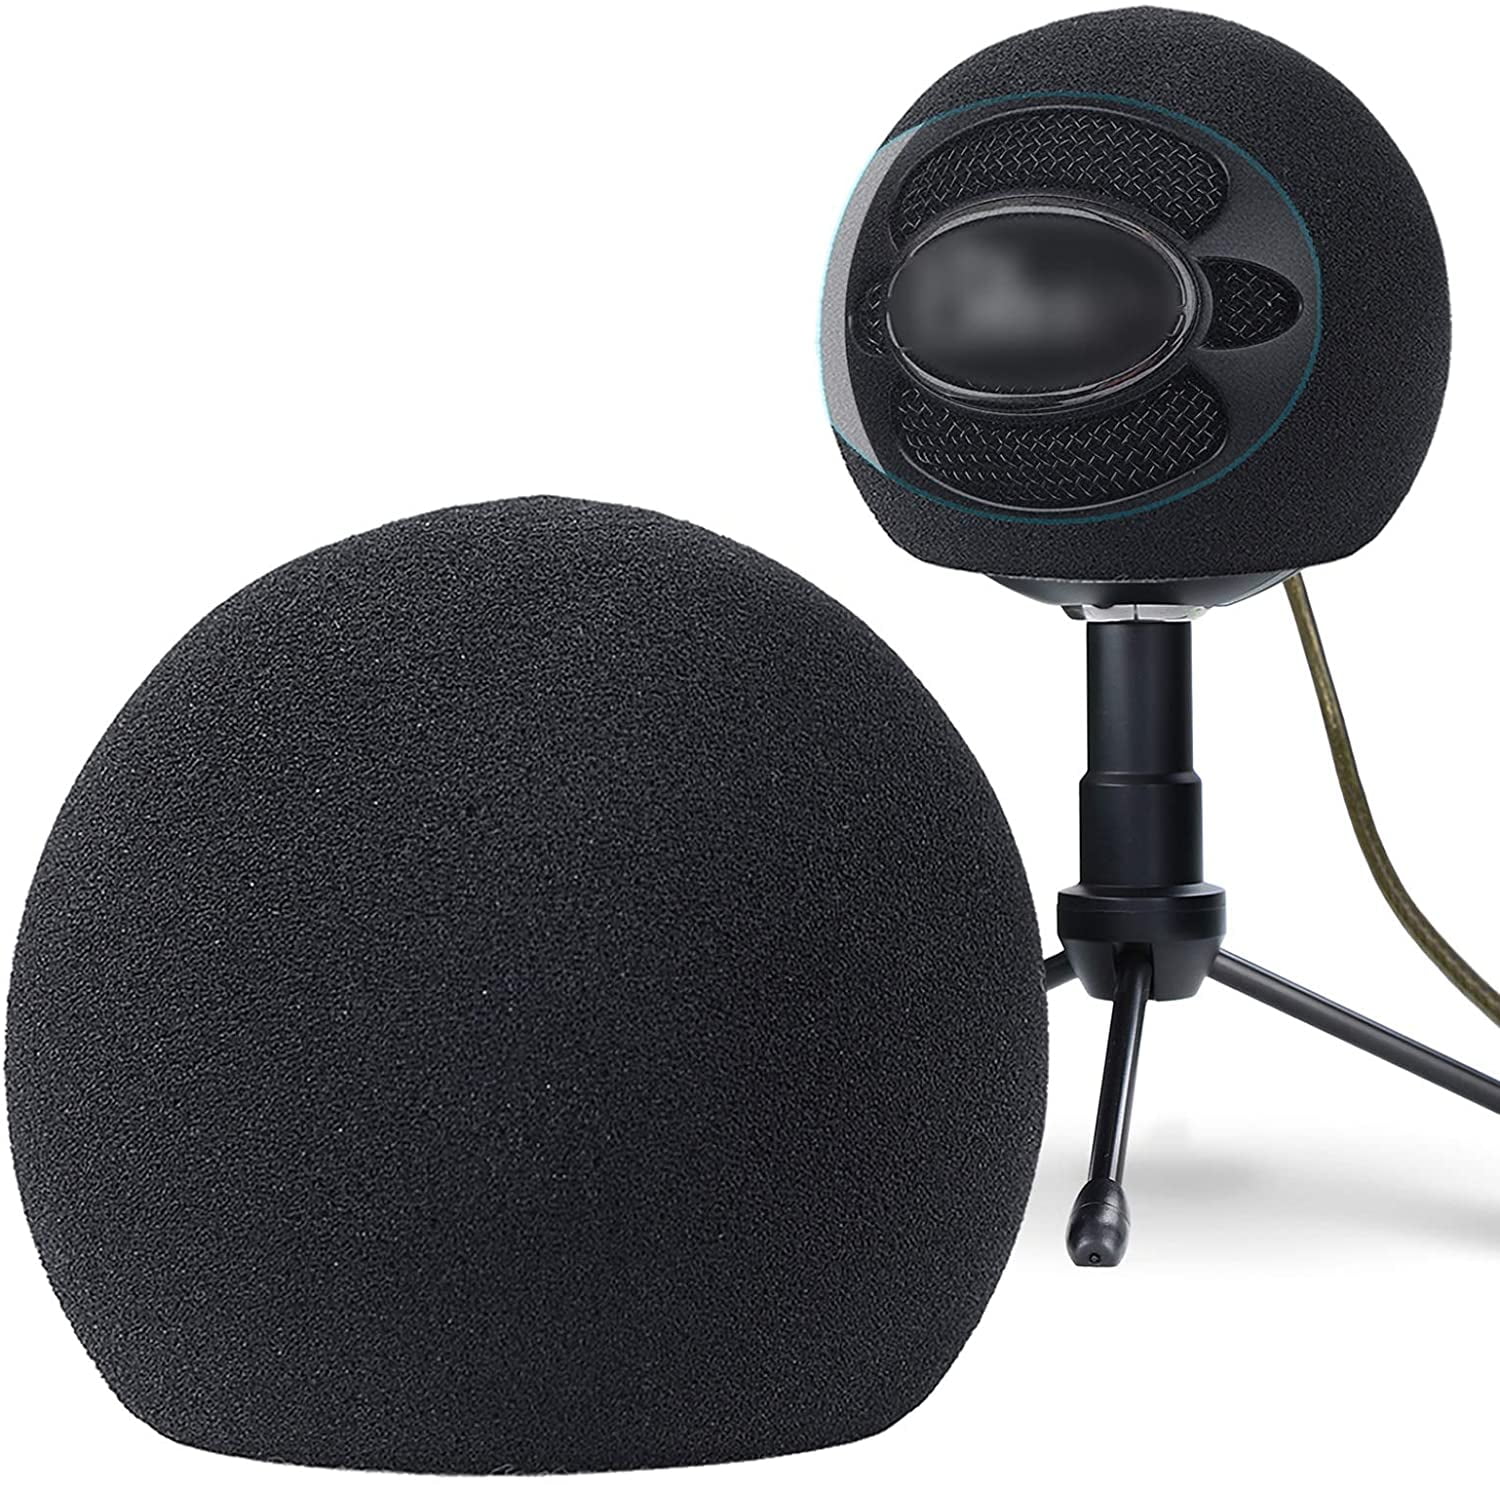 Customizing Microphone Windscreen Foam Cover for Improve Blue Snowball iCE Mic Audio Quality Blue Snowball Pop Filter Black 